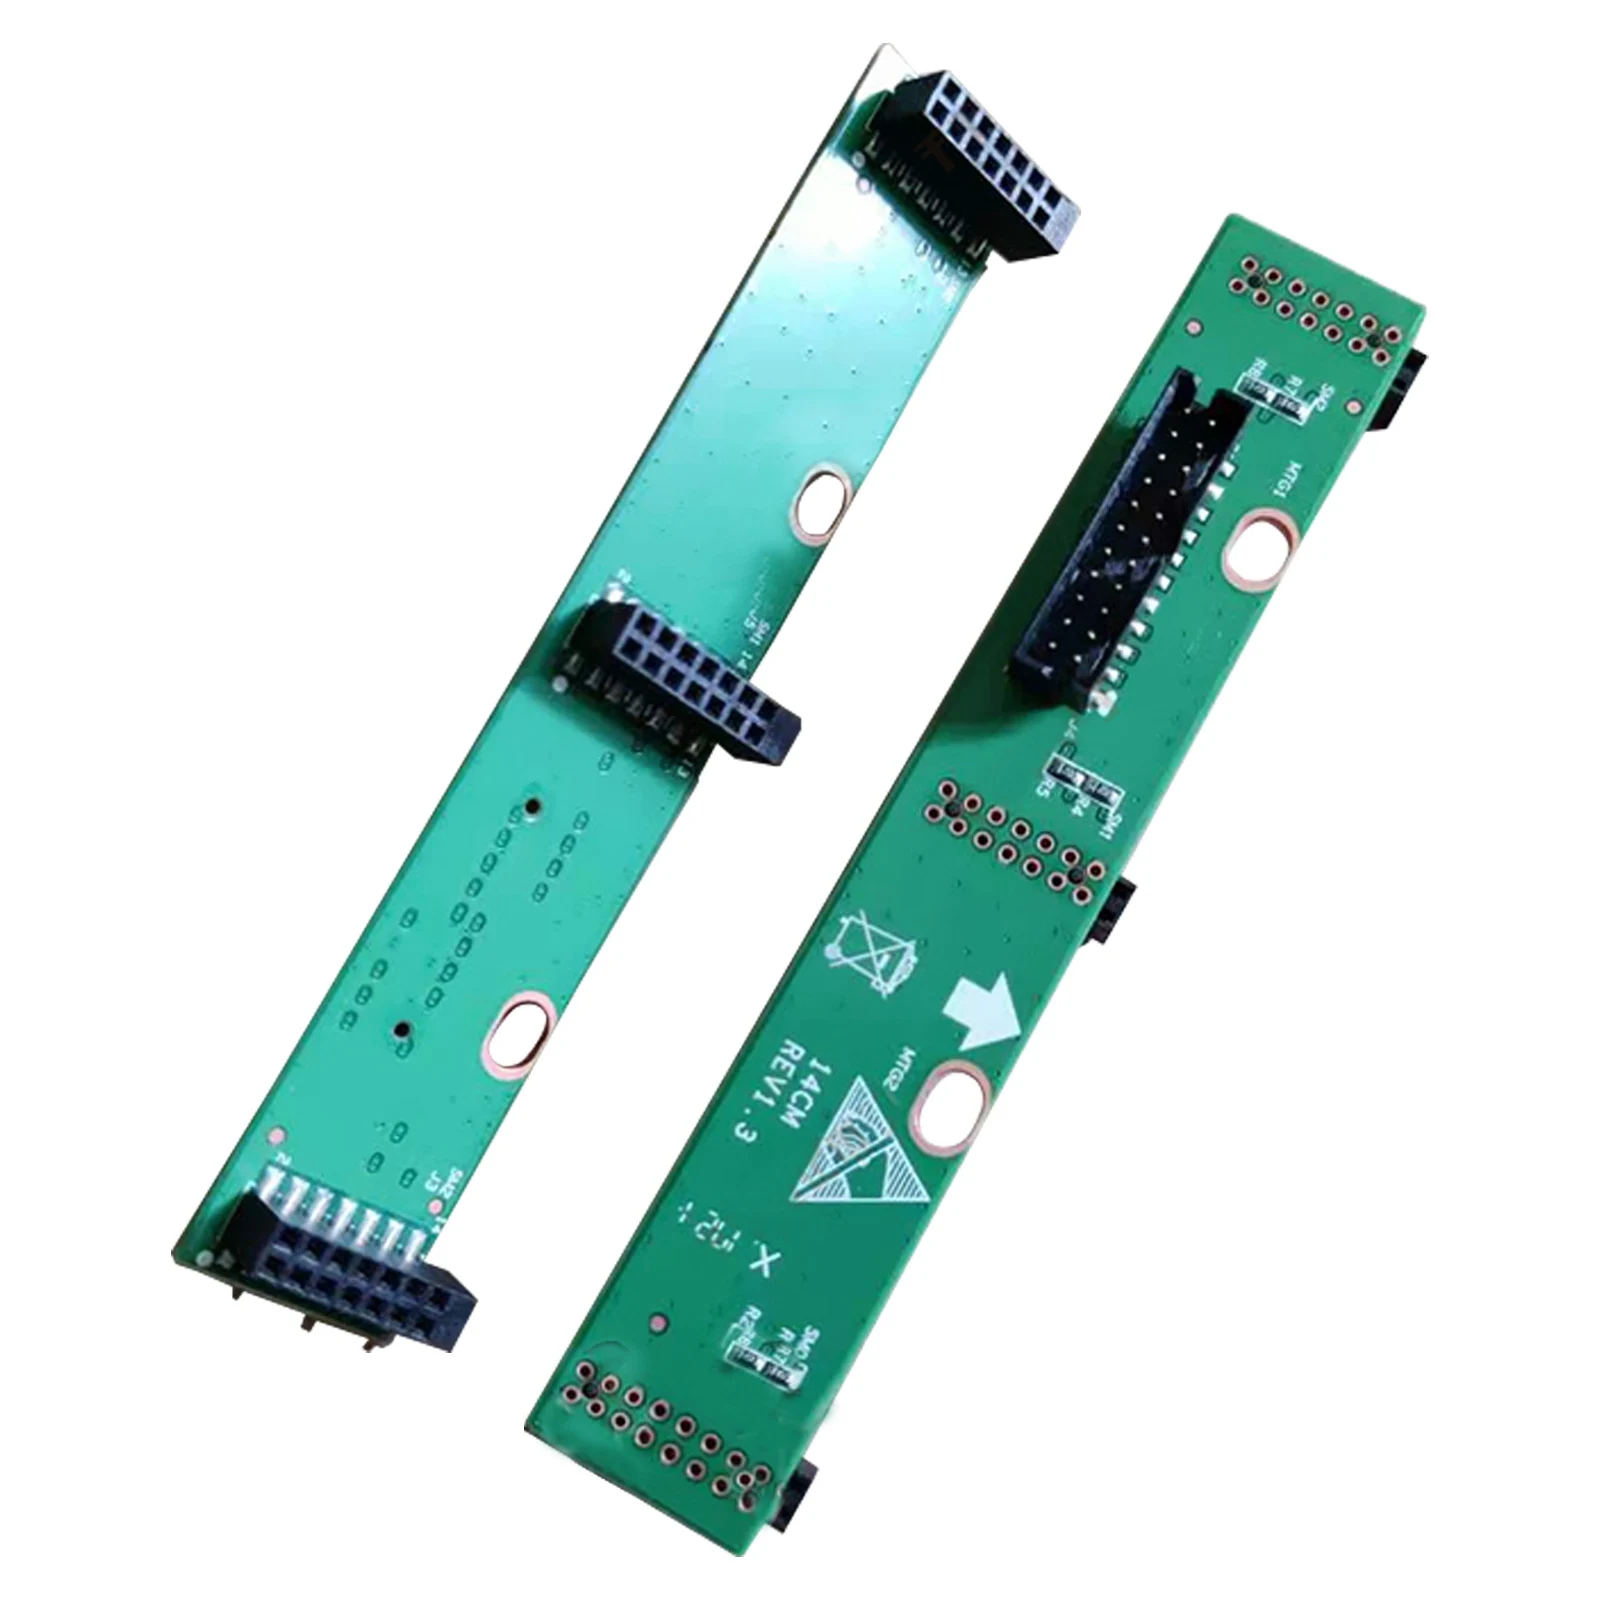 

New 1Pc 2Pcs Whatsminer Connector Btwn Hashboard and Control Board M20/M30/M21S SERIES 3 in 1